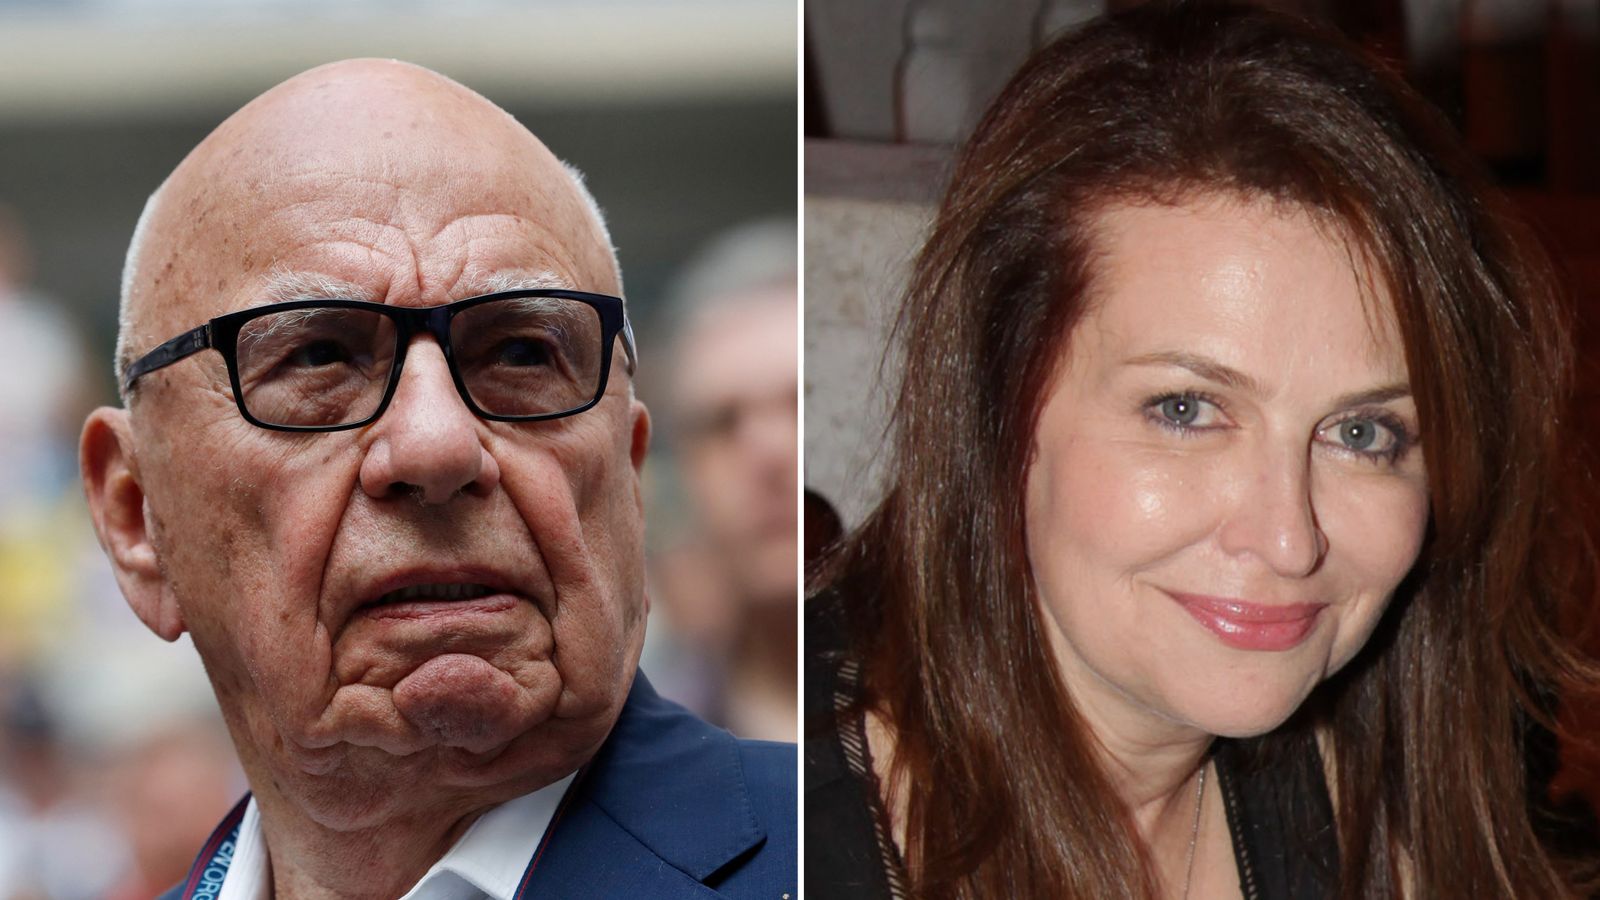 Rupert Murdoch engaged again at 92, according to reports